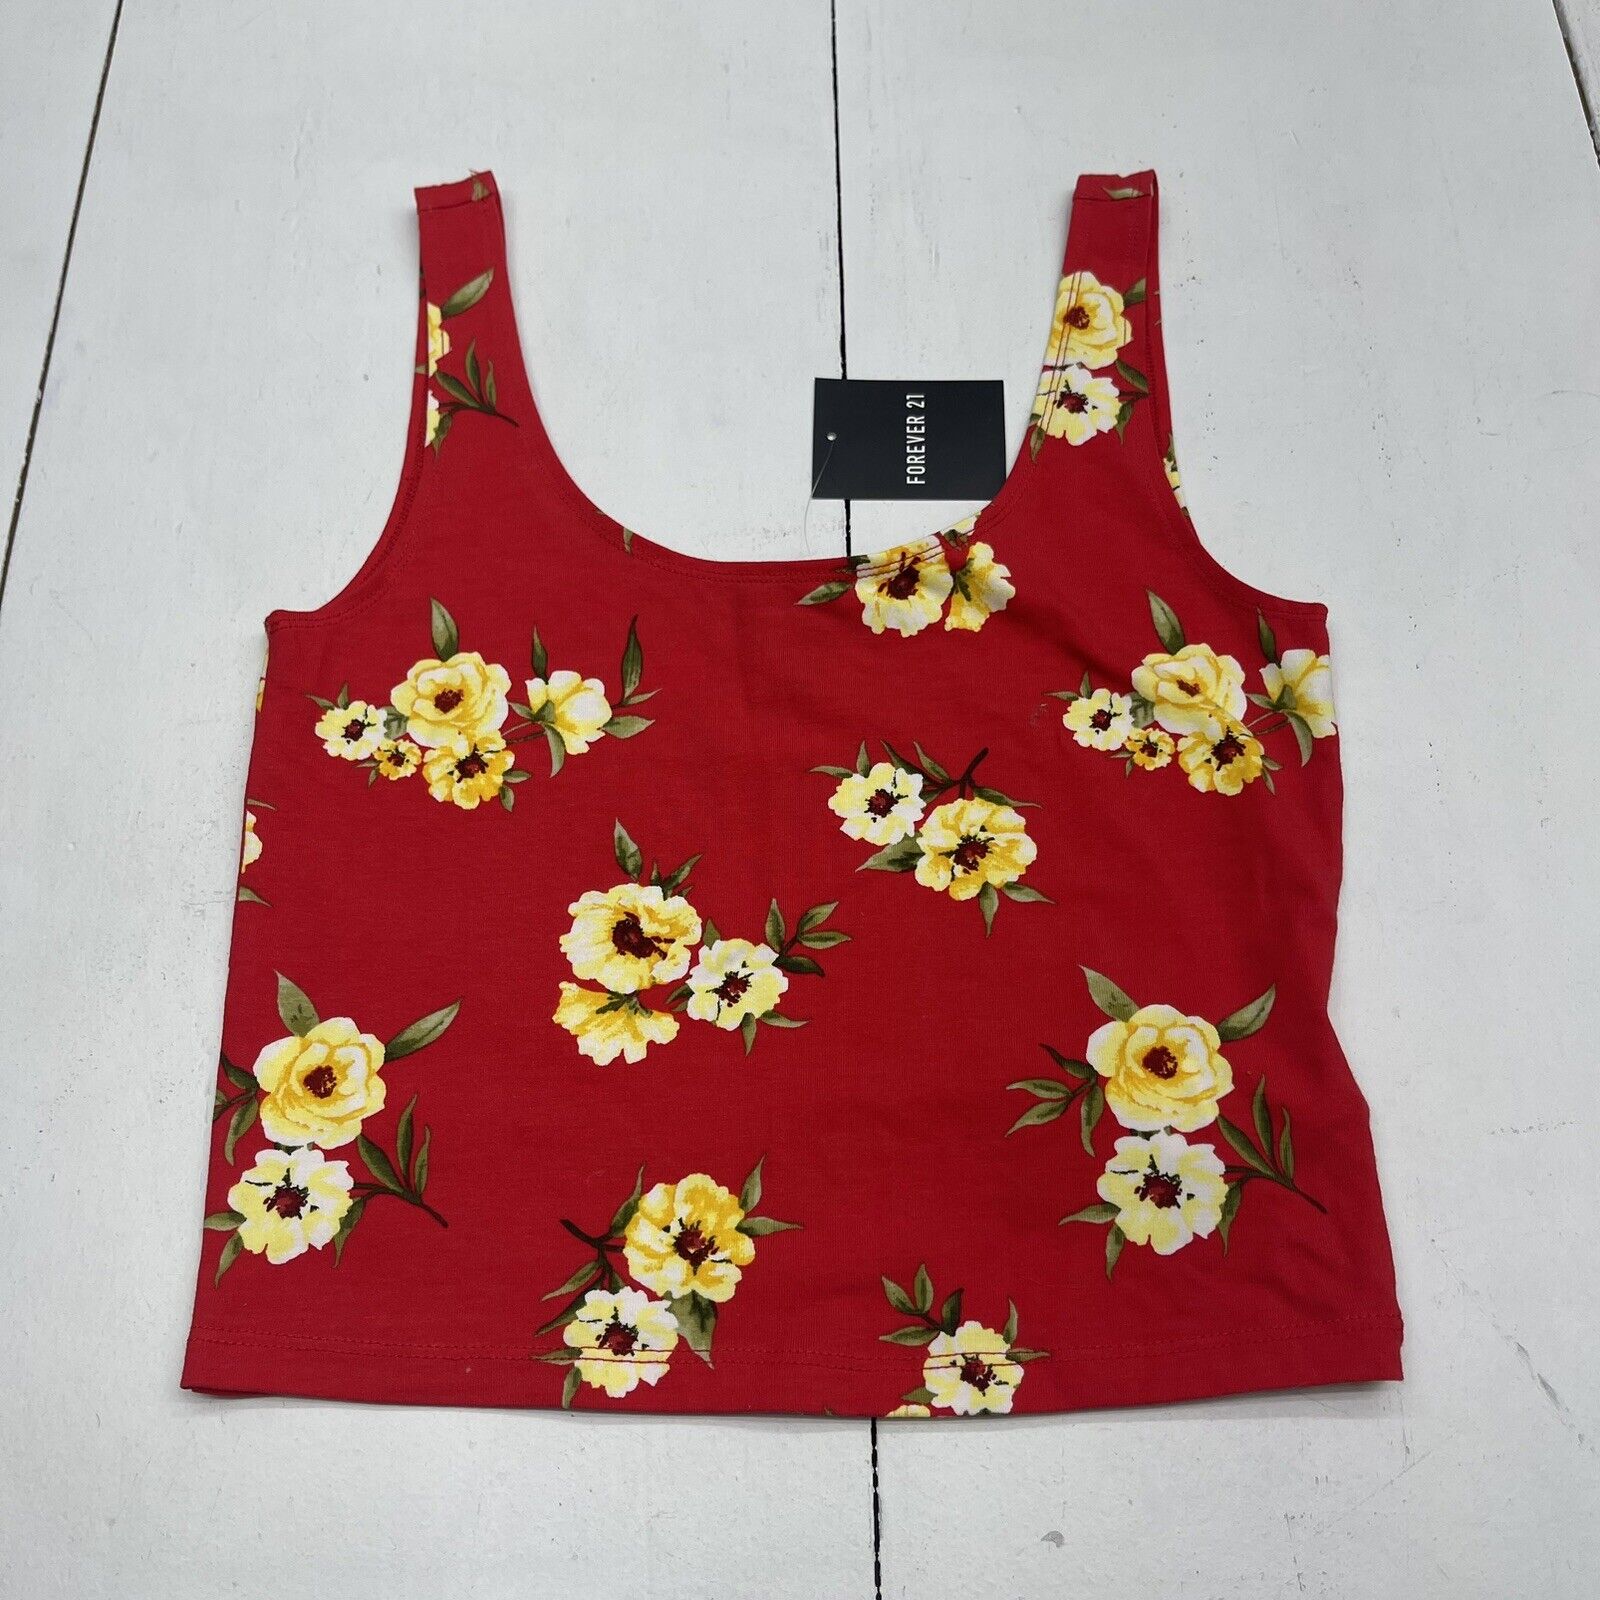 Forever 21 Red Floral Crop Tank Top Women’s Size Medium New